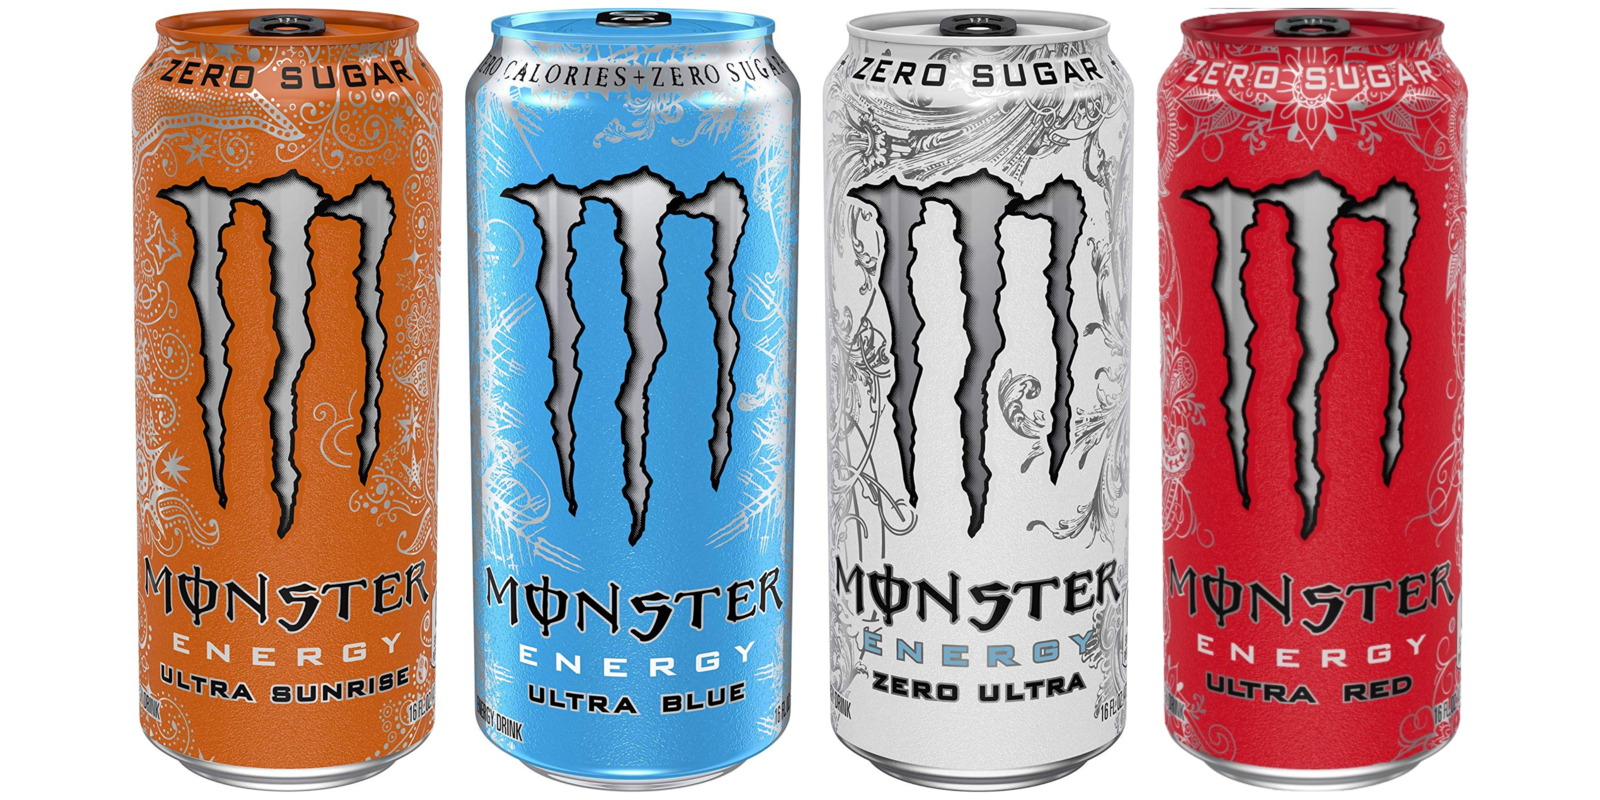 Monster Energy Ultra Zero Sugar 4 Flavor Variety Pack 12 Cans, 16 Fl Oz  - $39.99